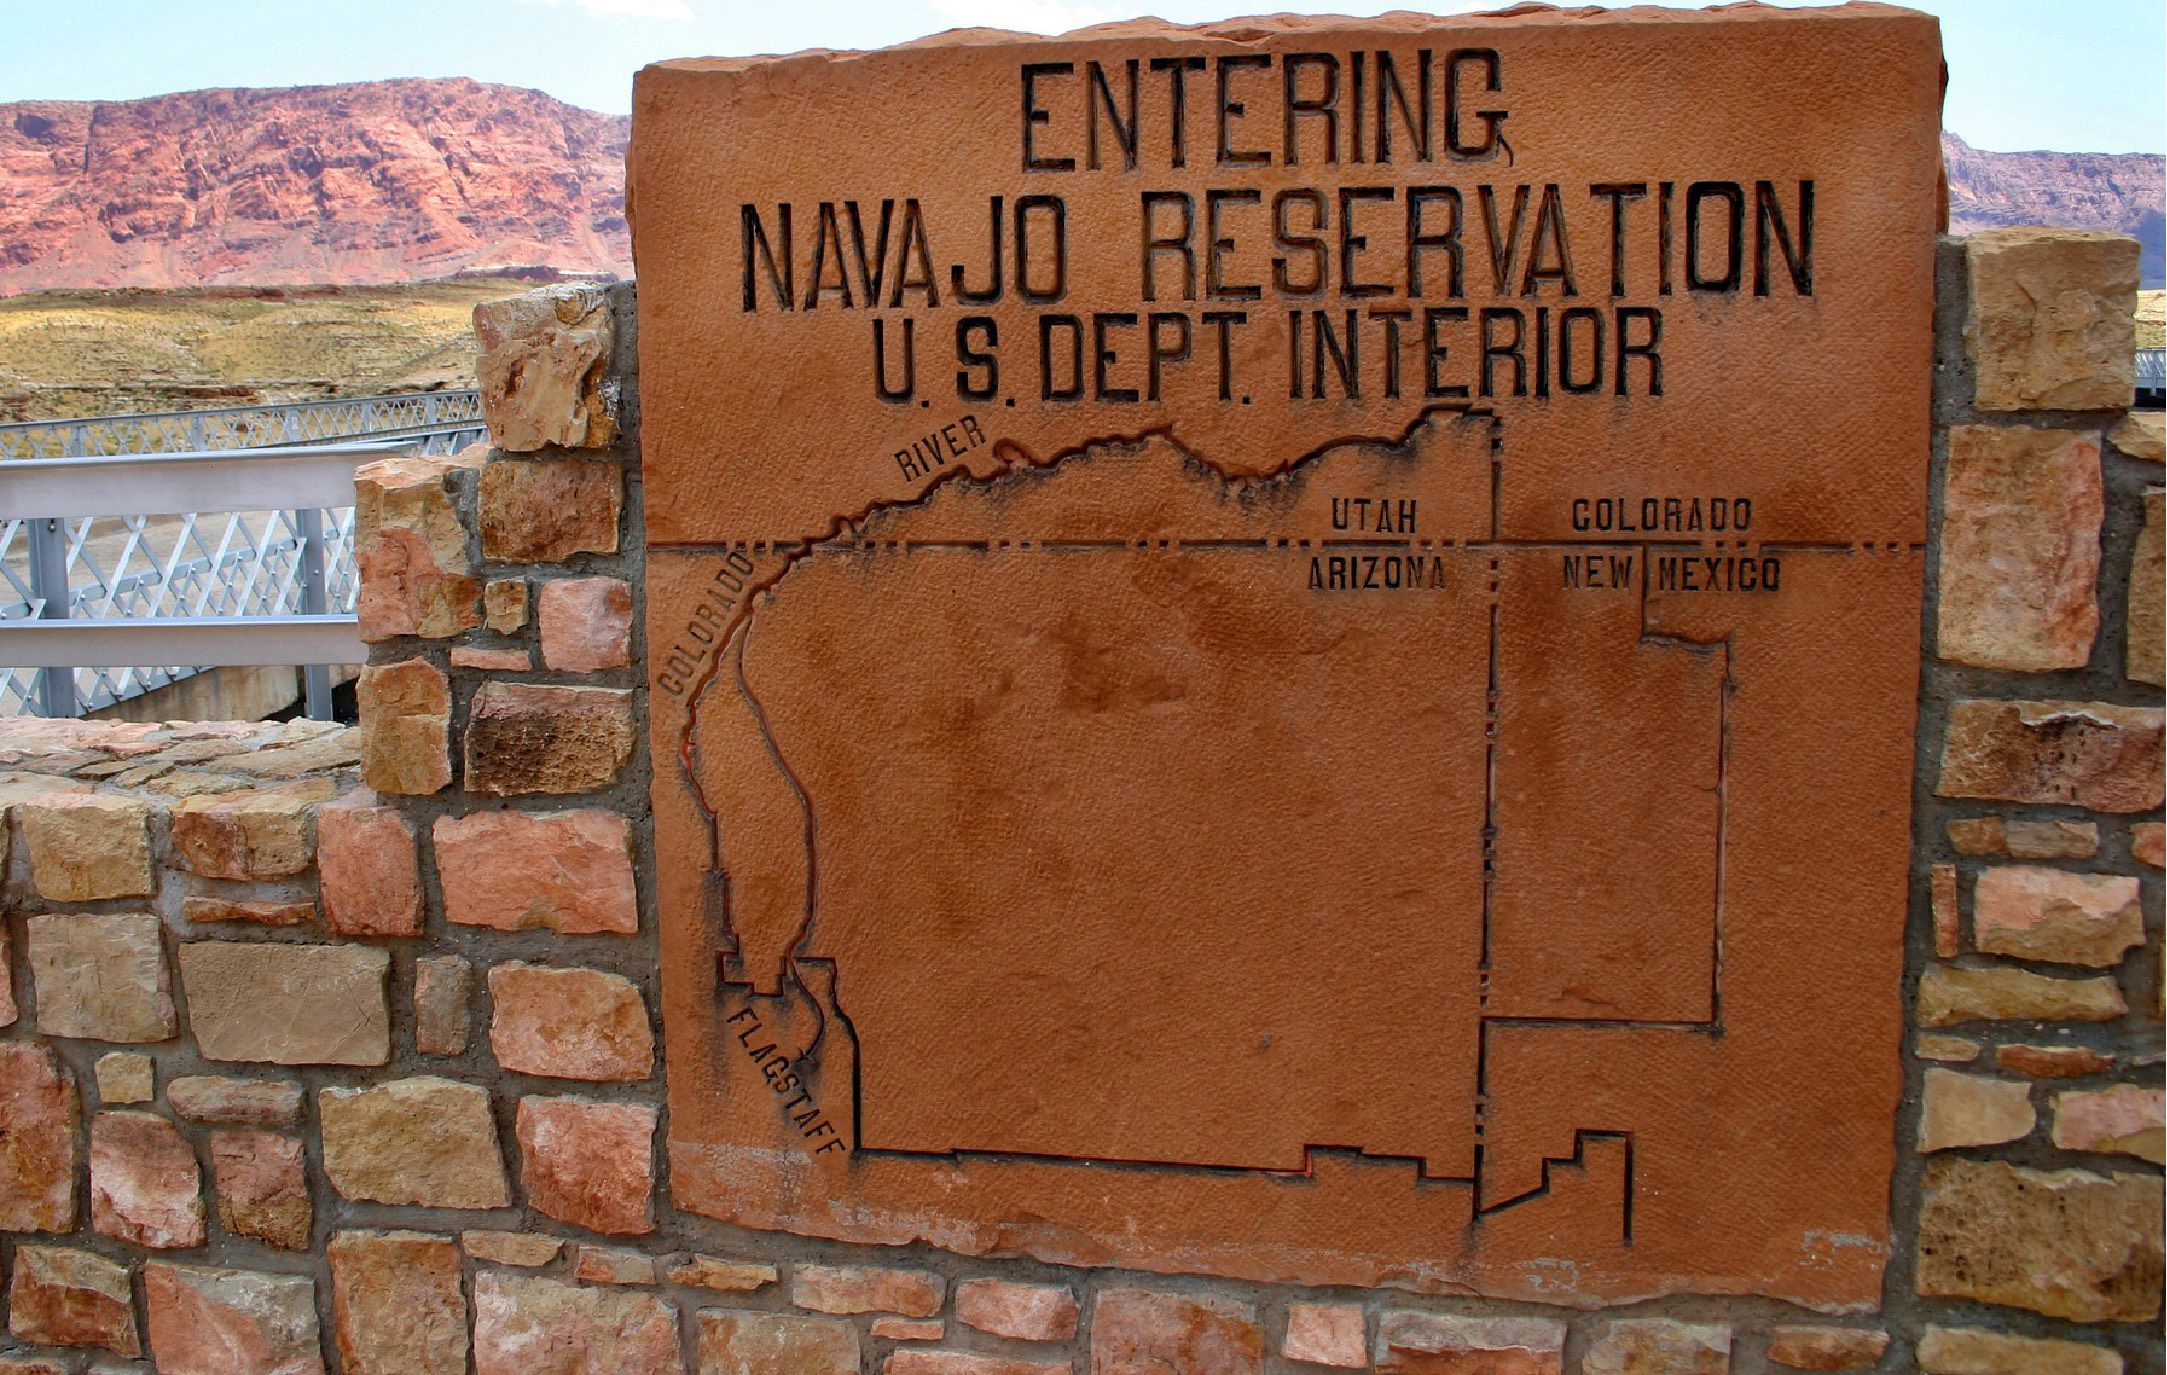 Sign at the entrance of the Navajo Nation with a map of the reservation location